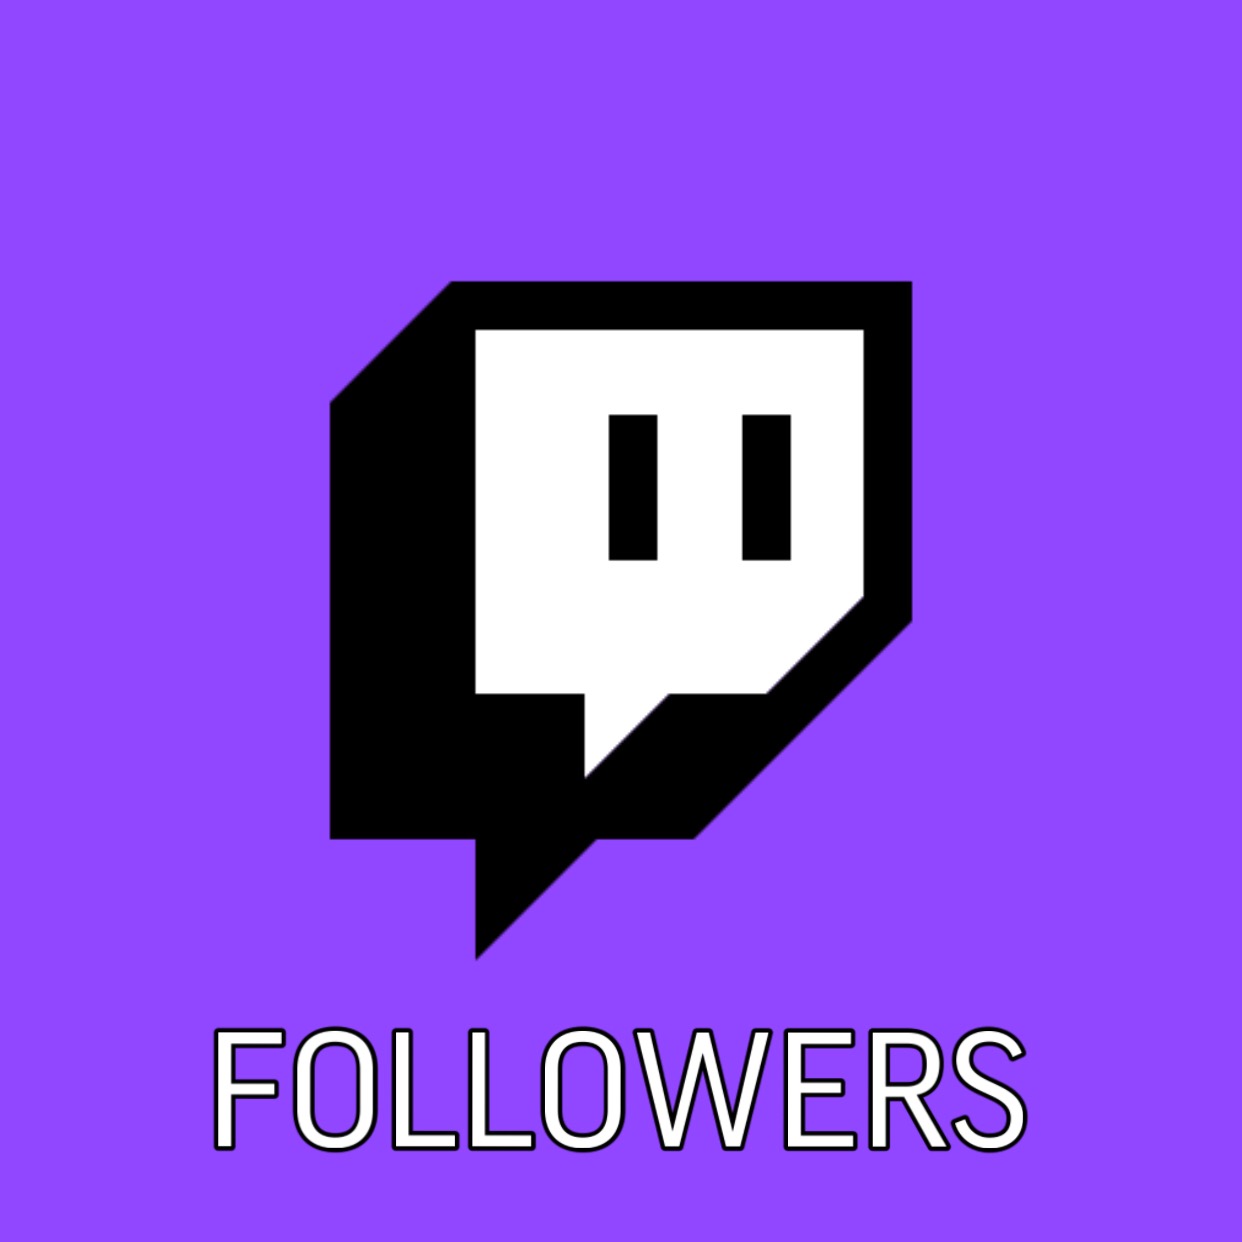 Buy Twitch followers 👤 | 100 RUB = 1000 FOLLOWERS and download